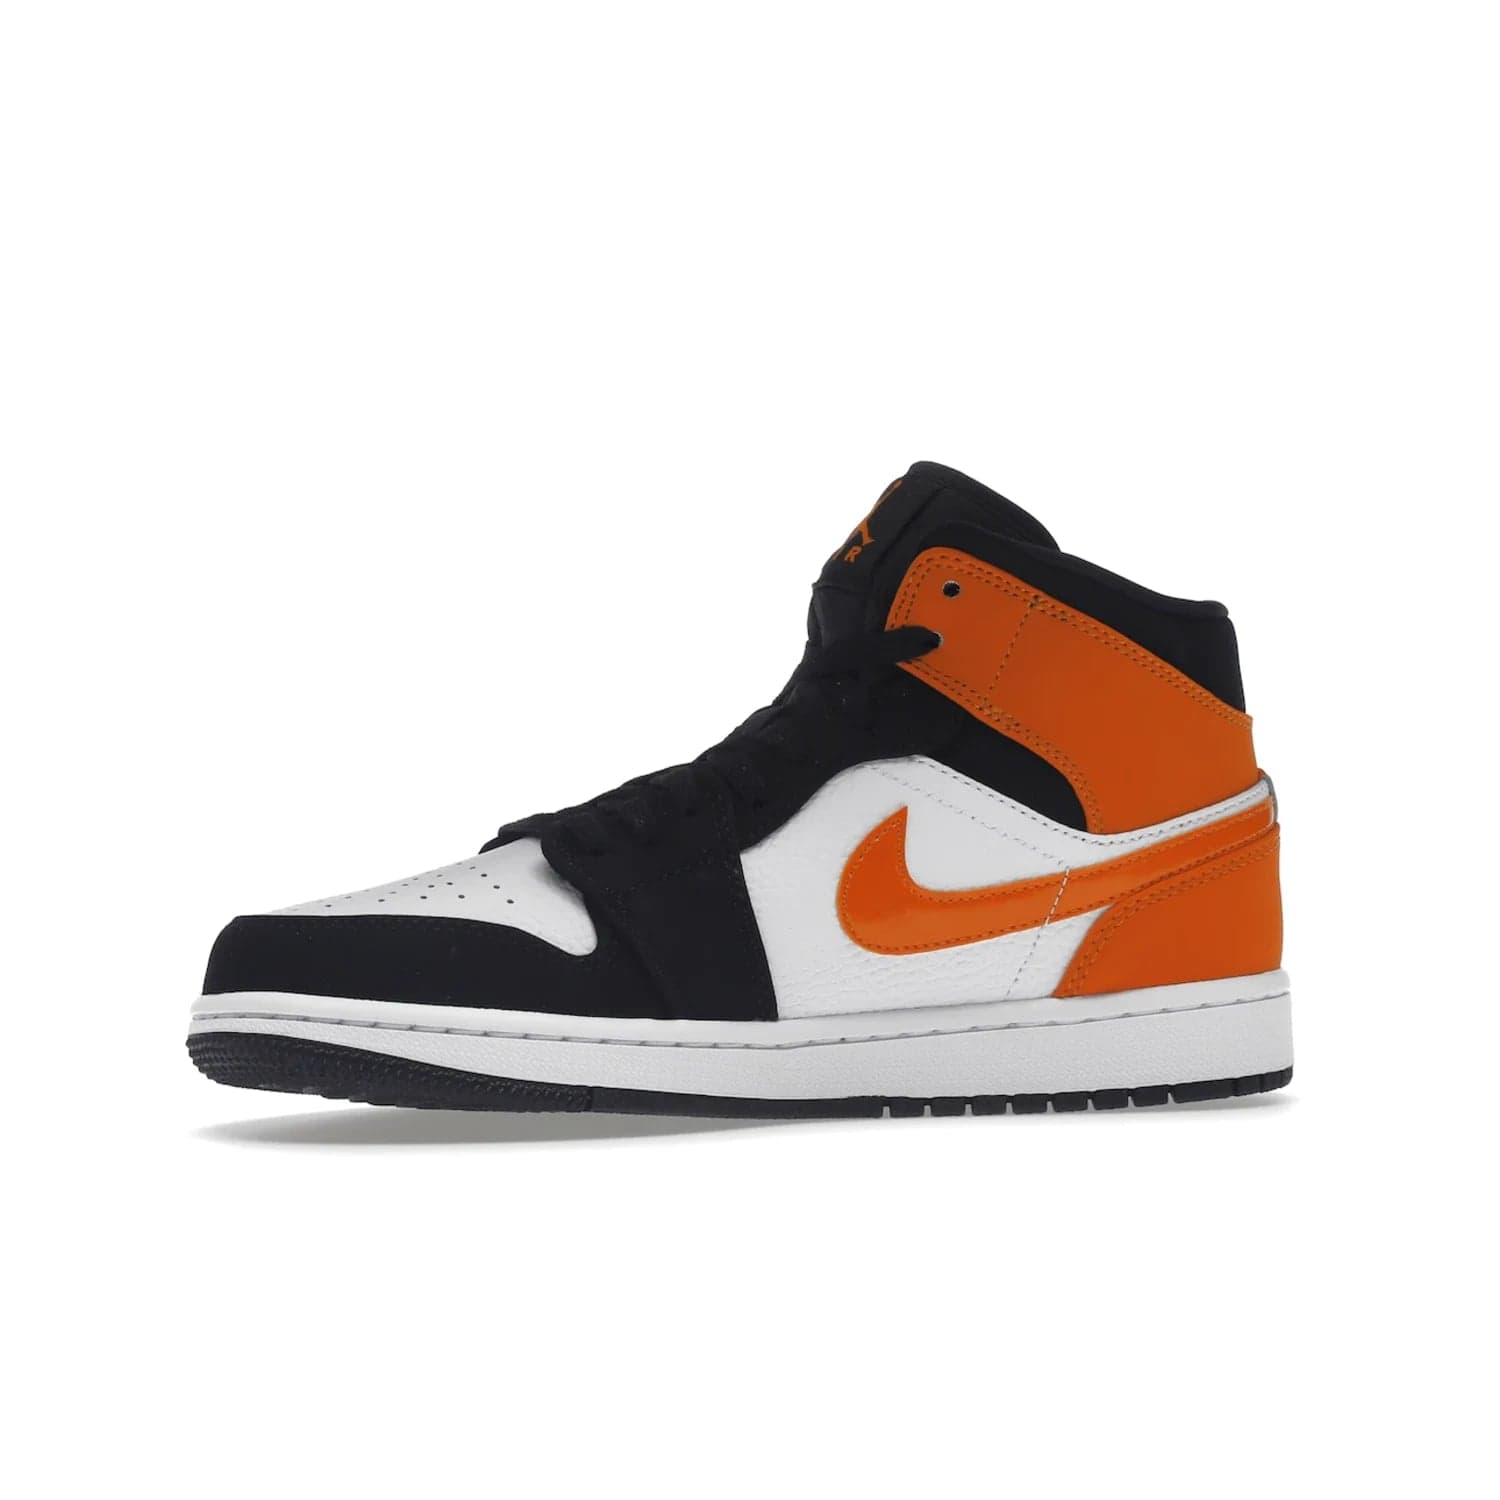 Jordan 1 Mid Shattered Backboard - Image 17 - Only at www.BallersClubKickz.com - The Air Jordan 1 Mid Shattered Backboard offers a timeless Black/White-Starfish colorway. Classic Swoosh logo and AJ insignia plus a shatterd backboard graphic on the insole. Get your pair today!